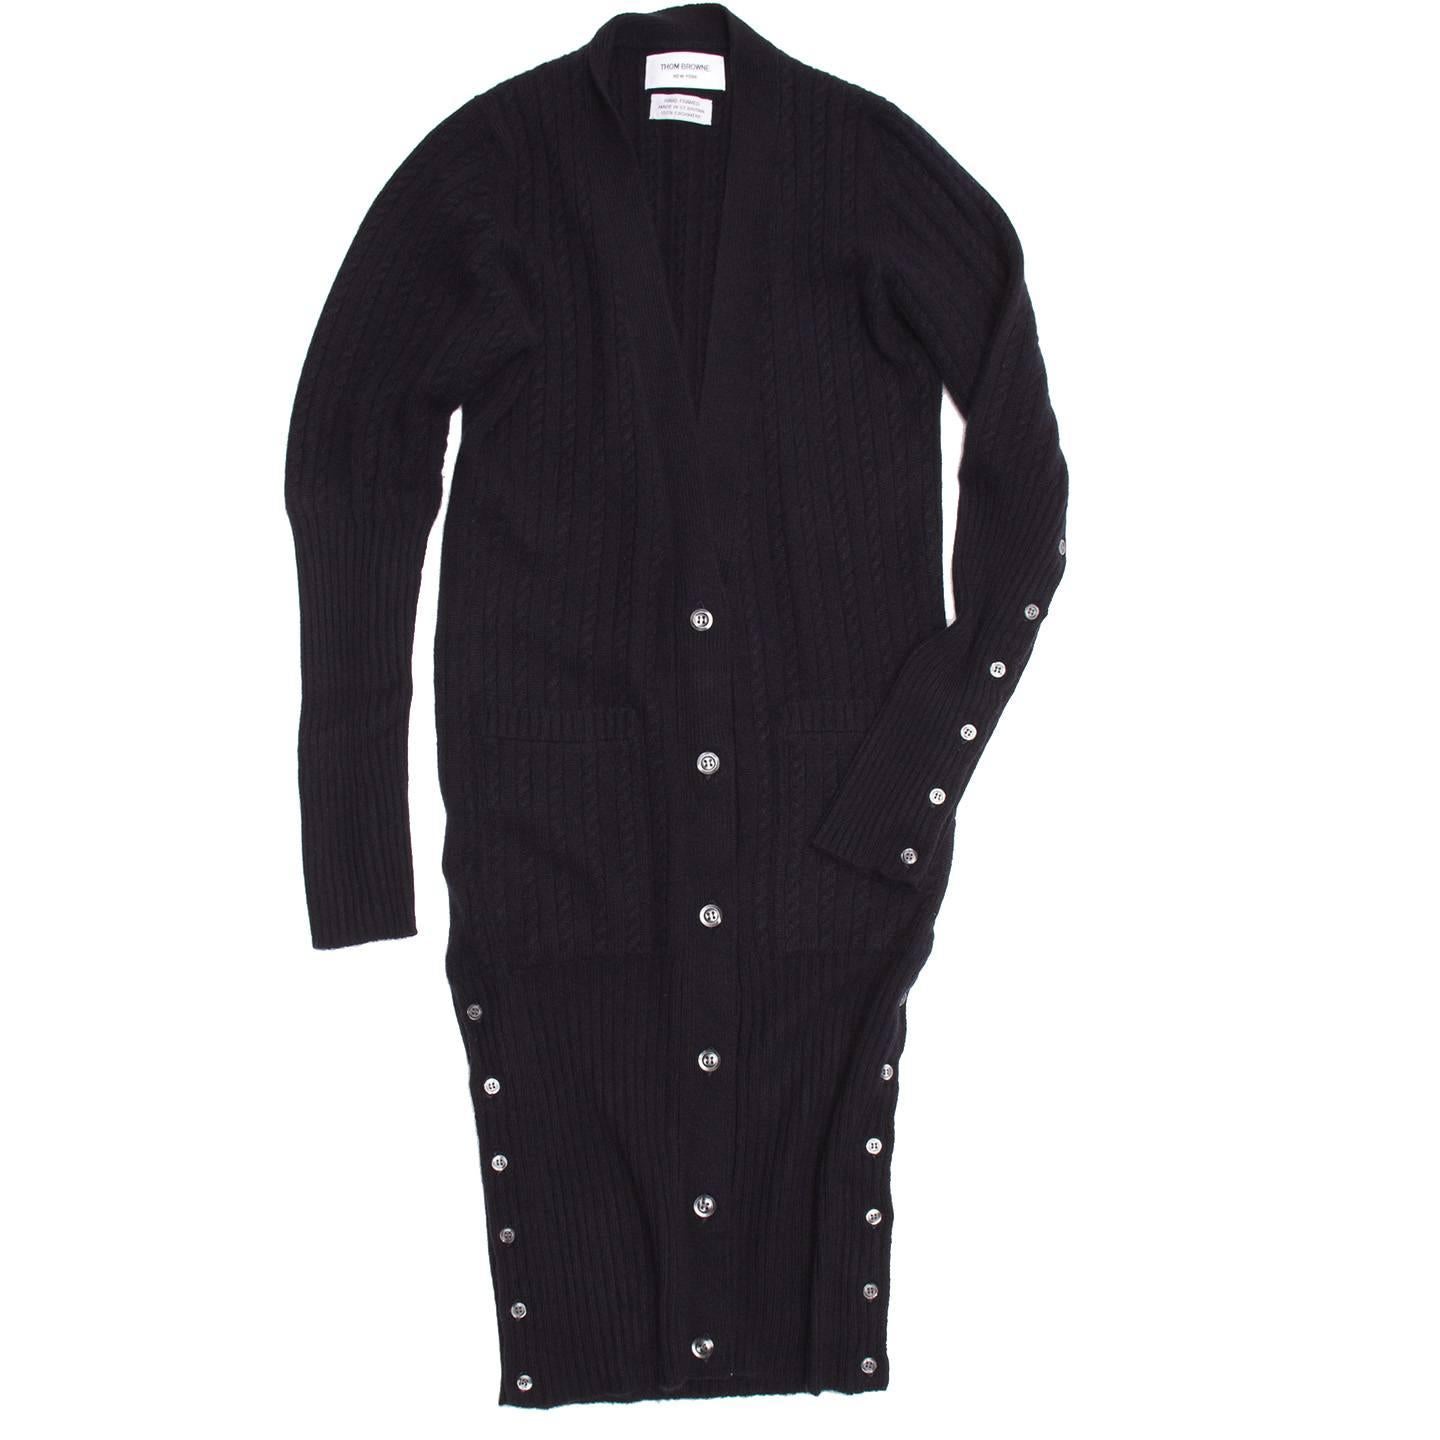 Hand framed navy blue cashmere cable knit V-neck dress or oversized cardigan with two little pockets at hips. It is a knee length cardigan with front, cuffs and hem that fasten with dark grey buttons and show a blue/red/white striped ribbon when